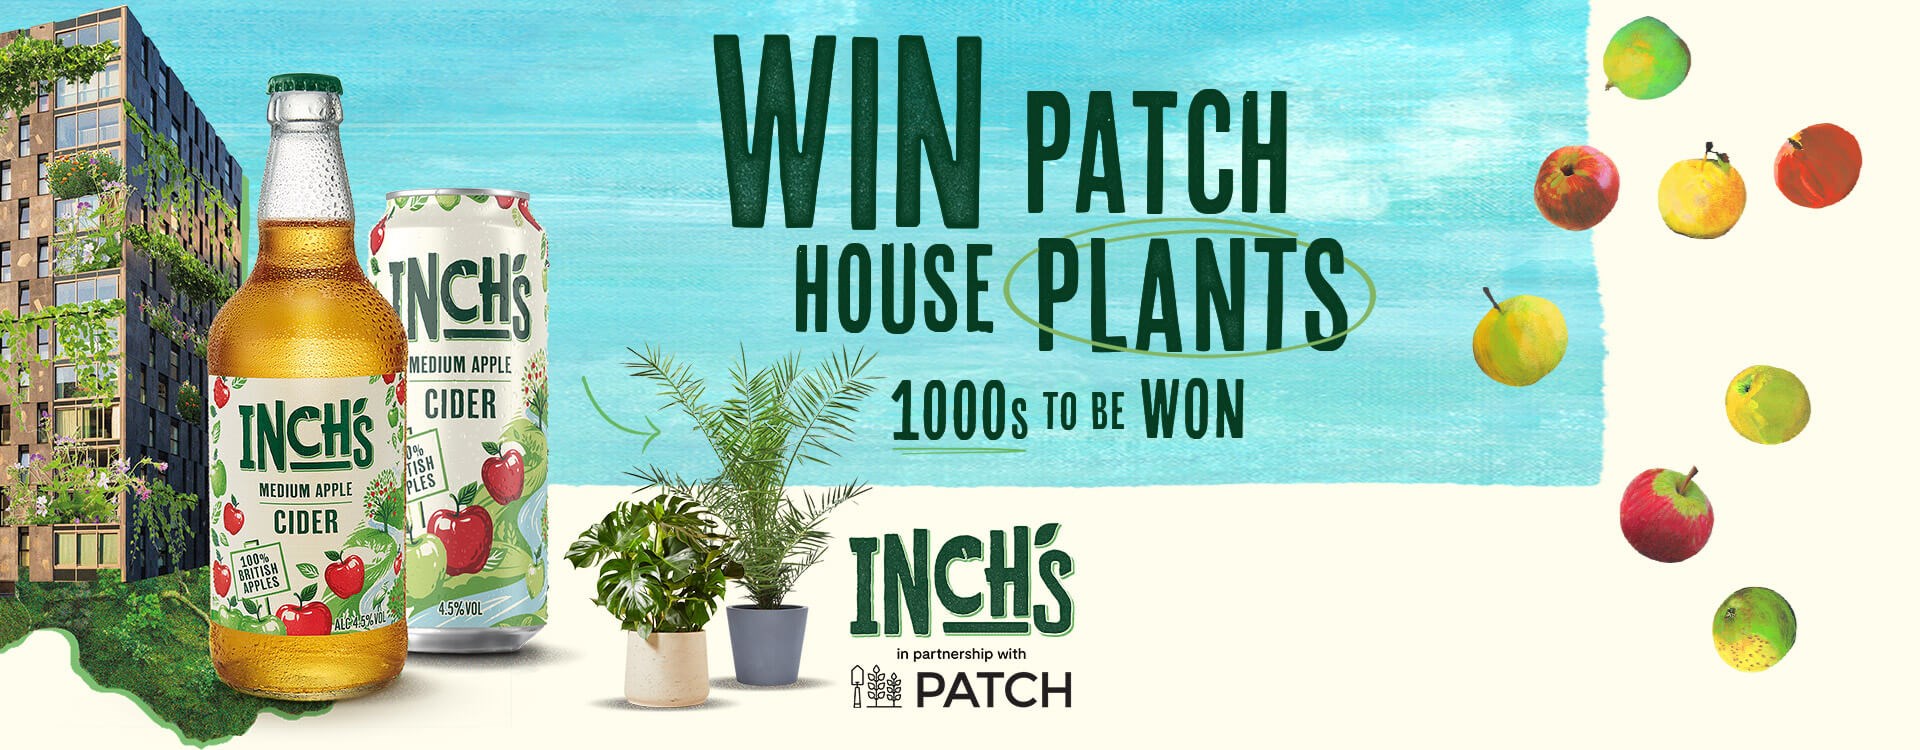 Win patch house plants banner